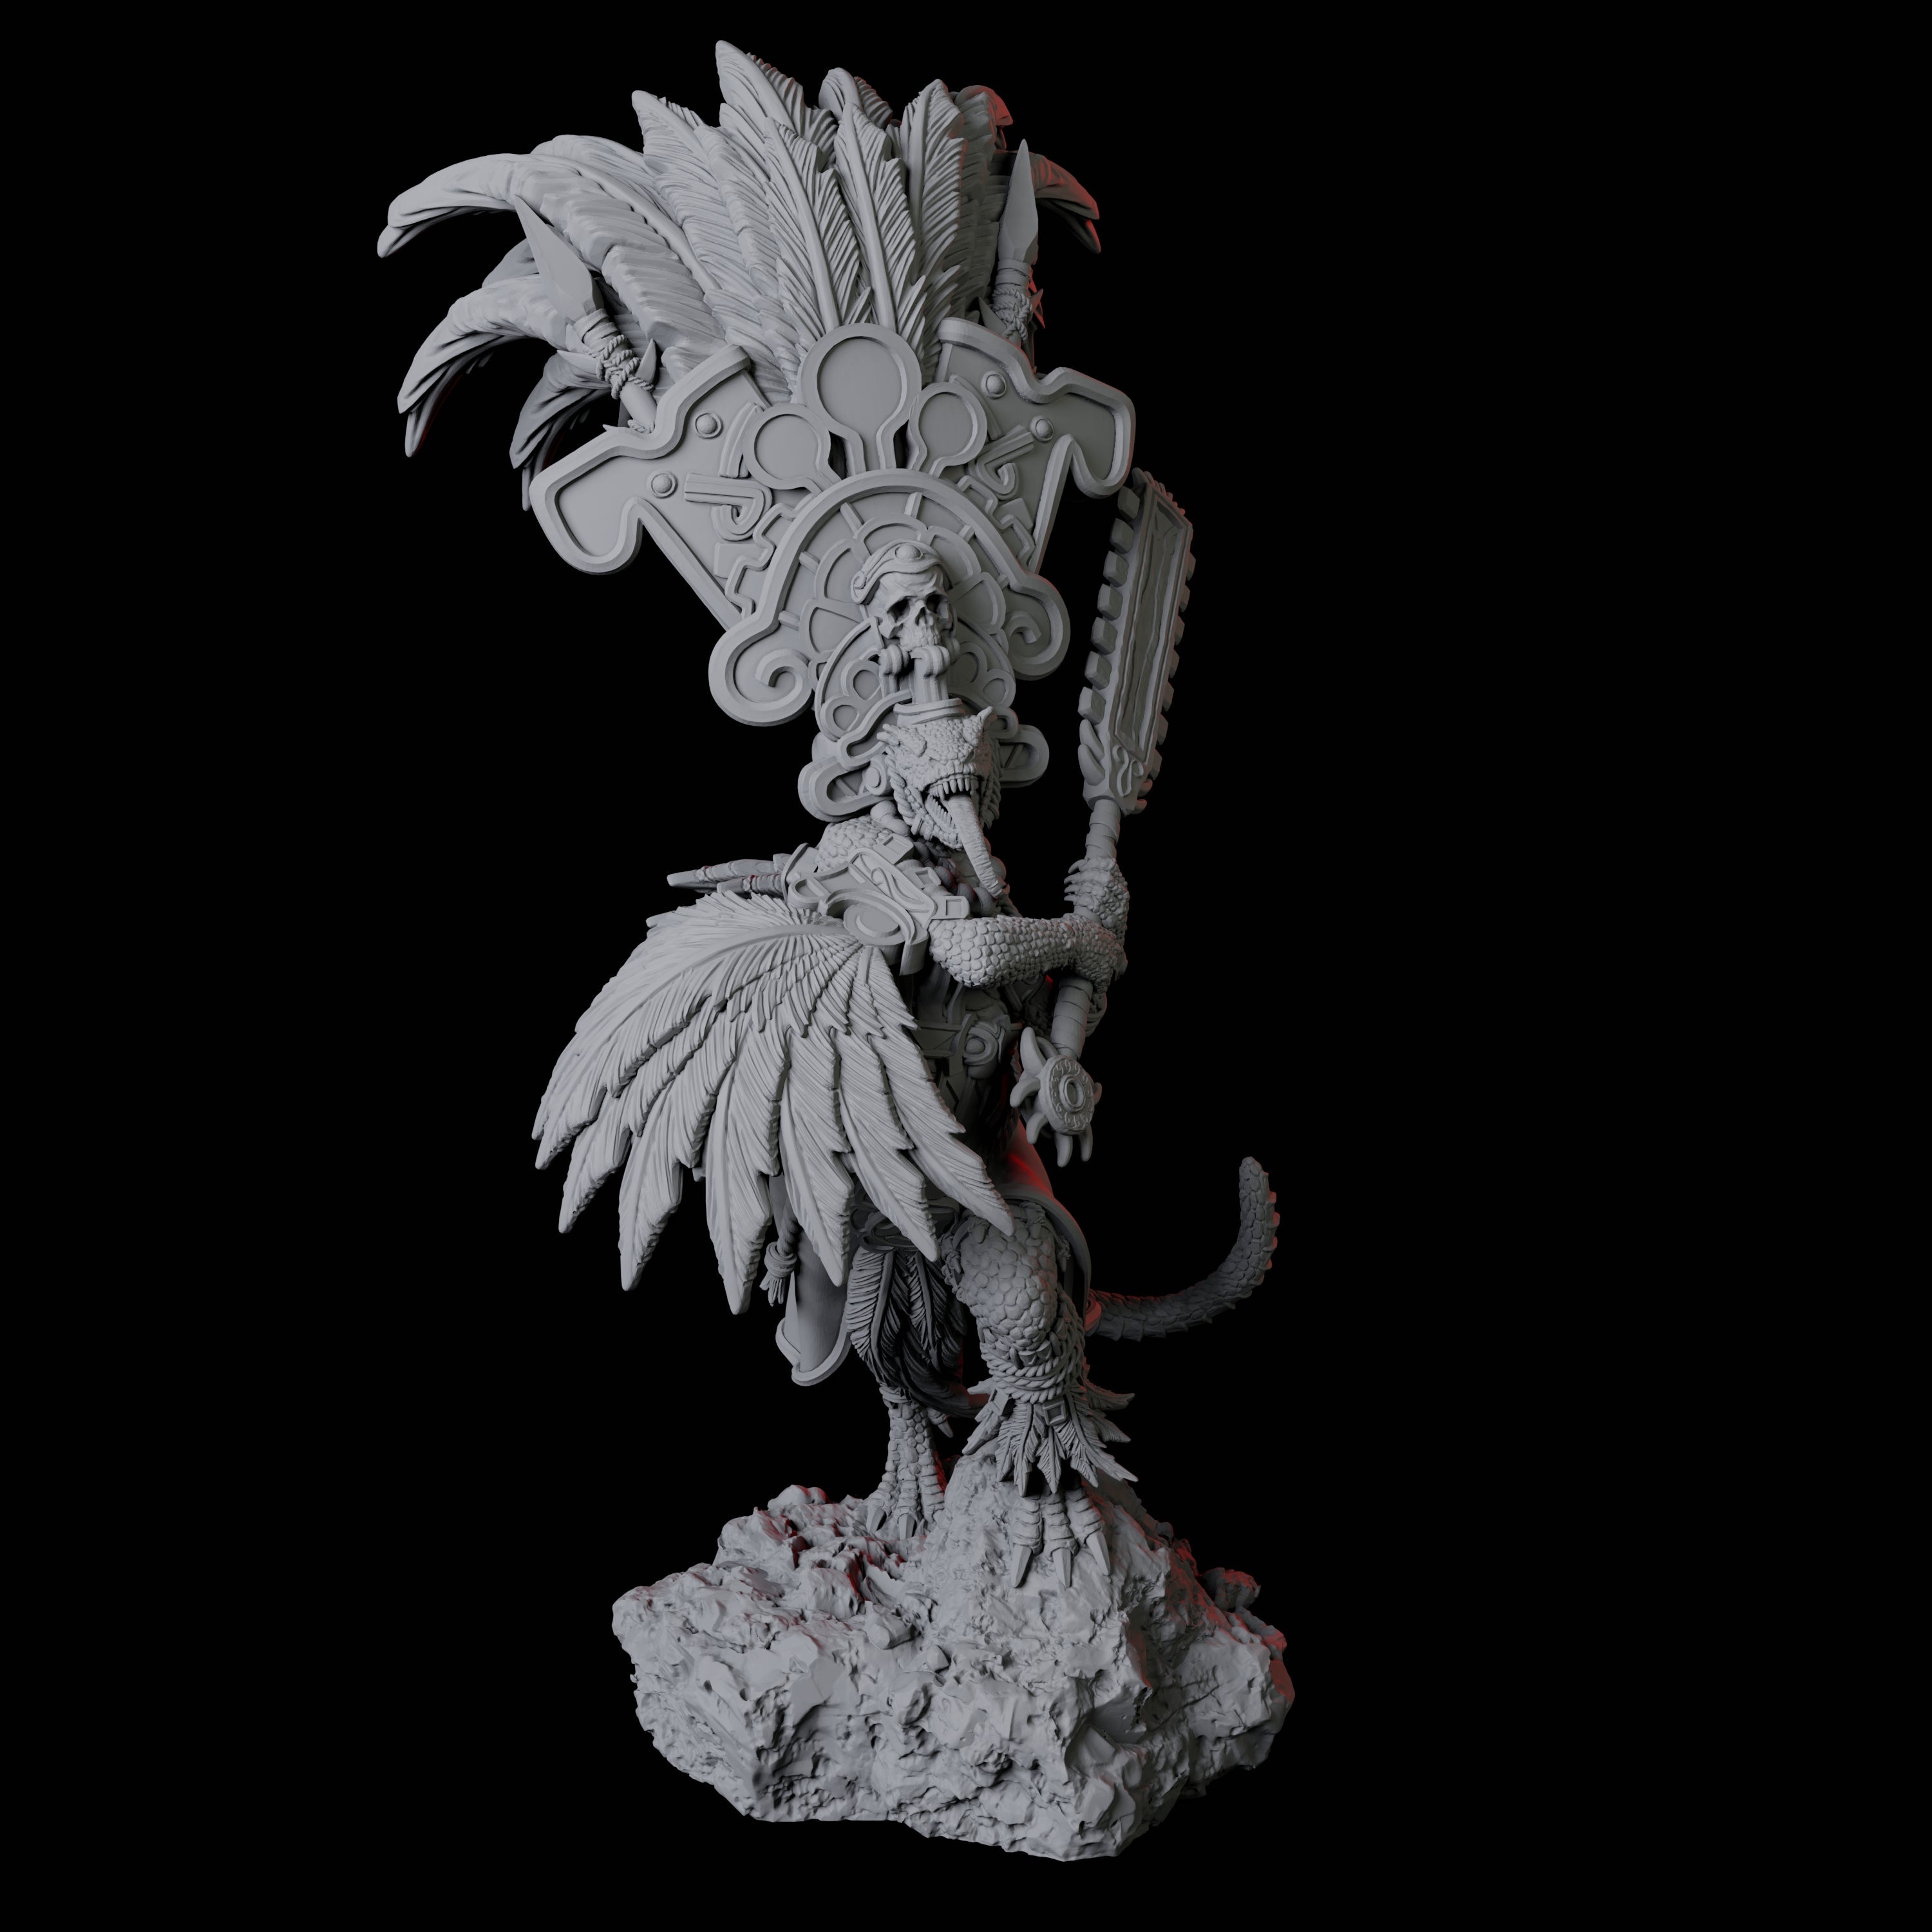 Lizardfolk Sundancer C Miniature for Dungeons and Dragons, Pathfinder or other TTRPGs